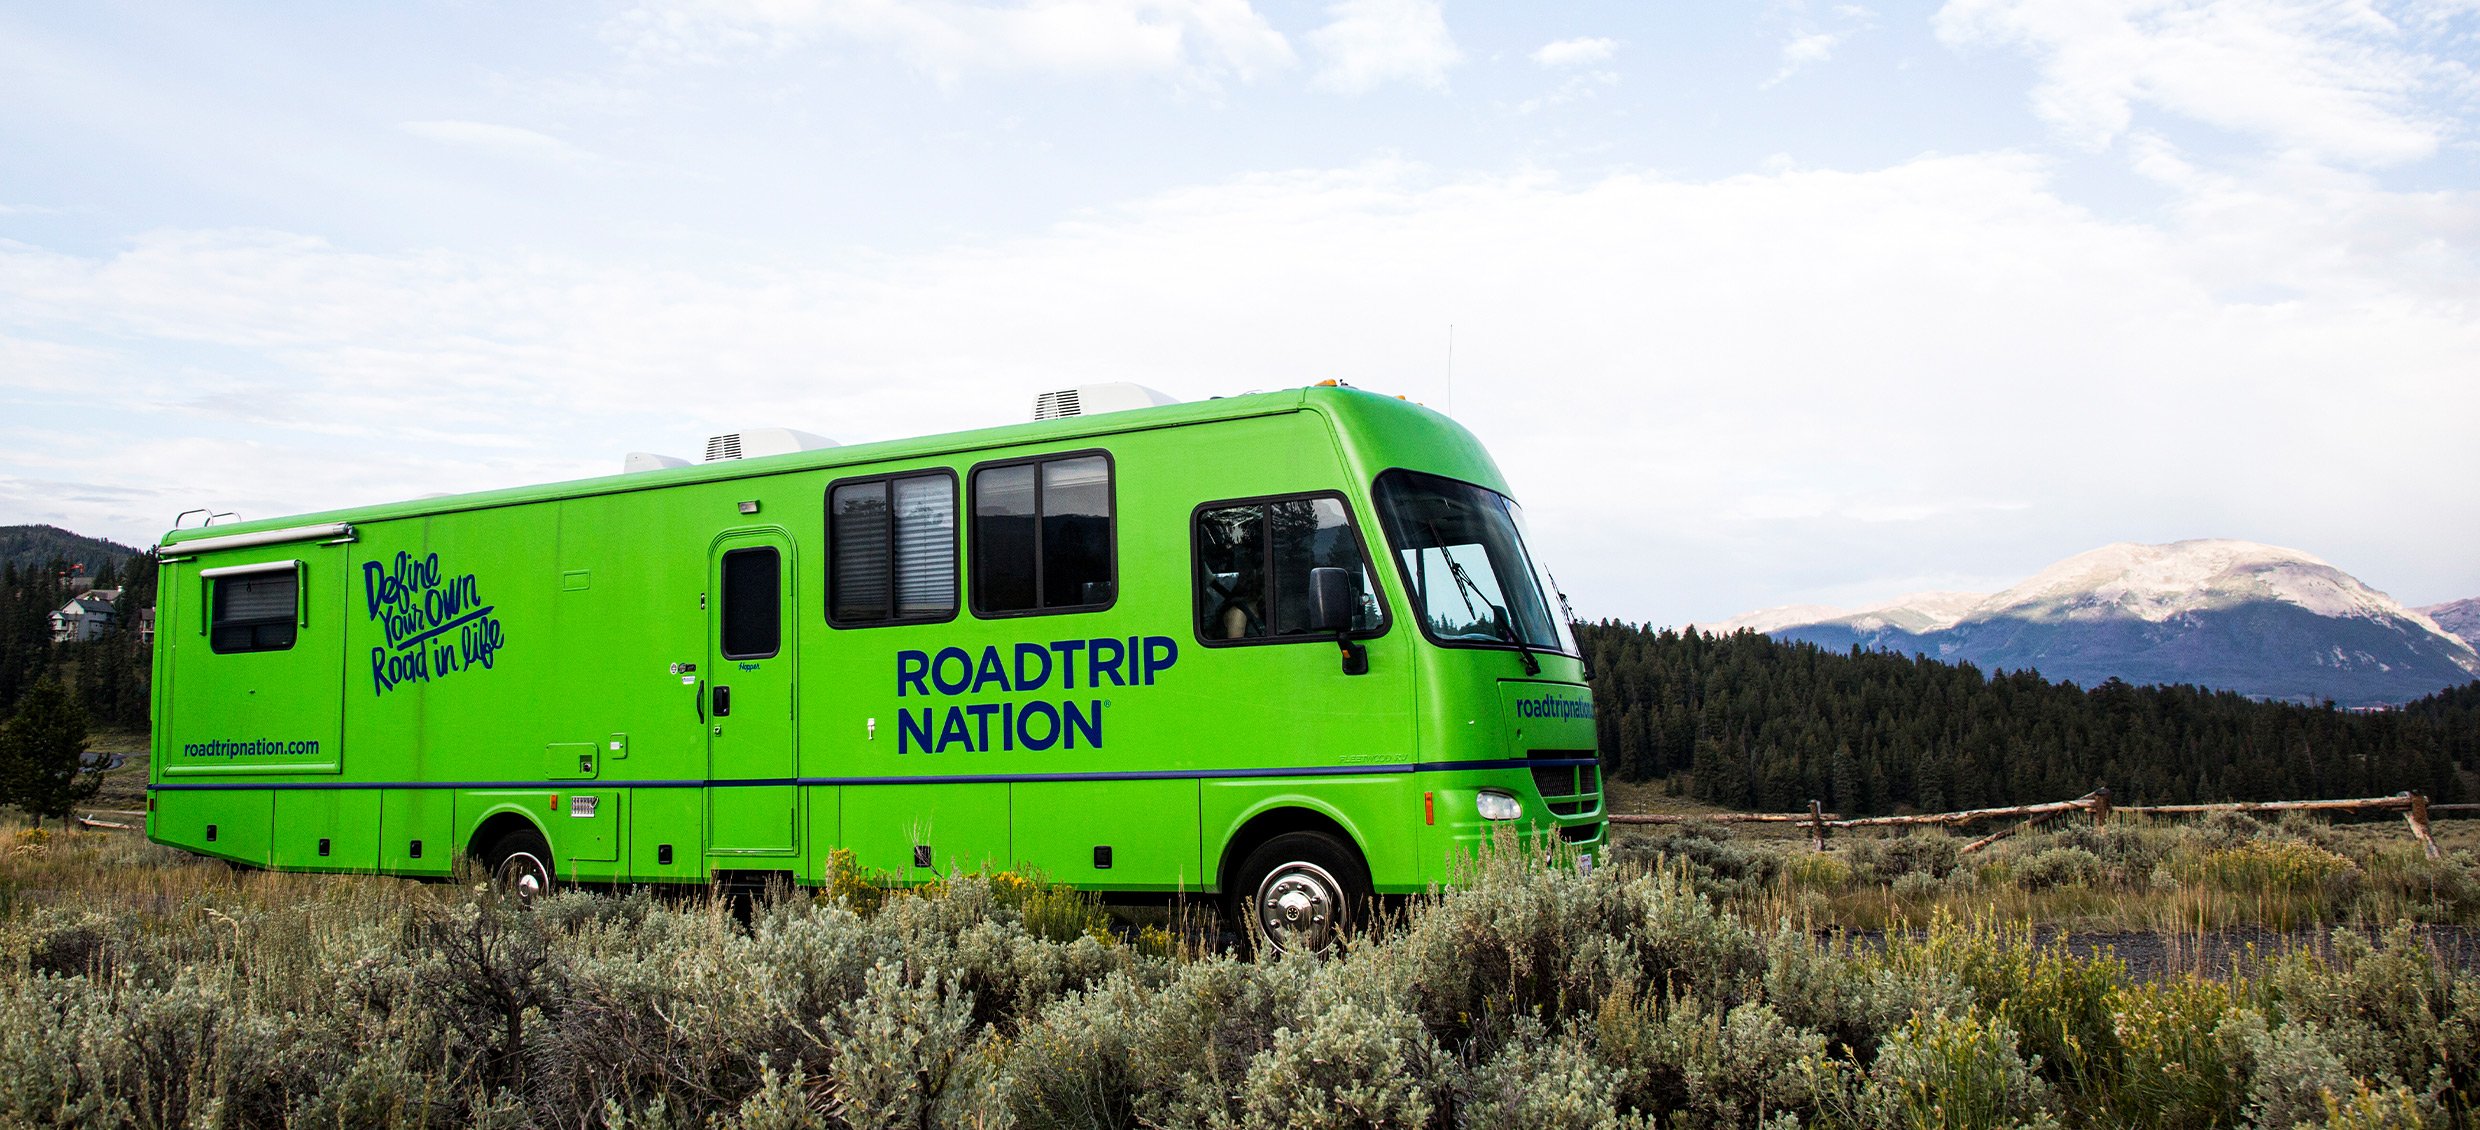 Roadtrip Nation's green RV parked in a field in front of a mountain range.